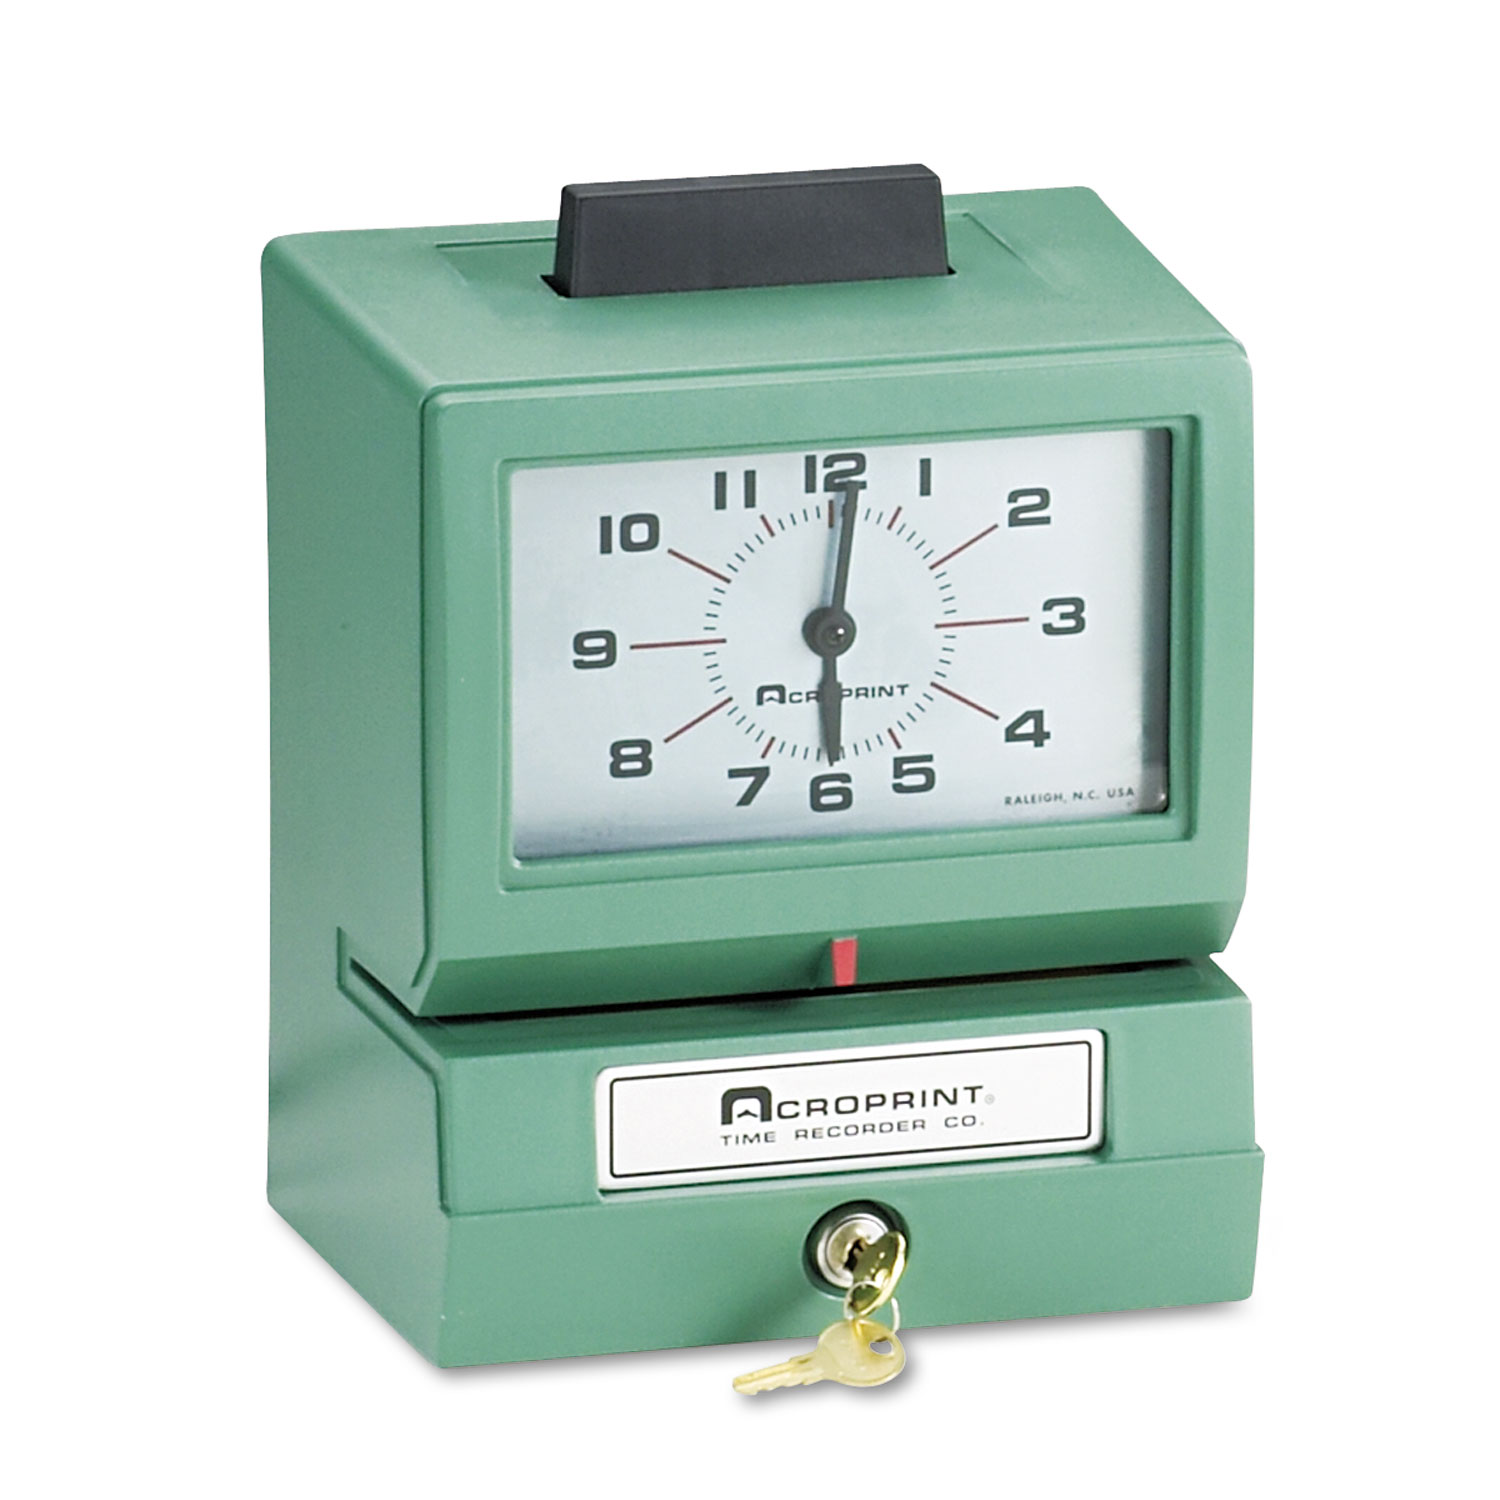 Model 125 Analog Manual Print Time Clock with Date/0-12 Hours/Minutes